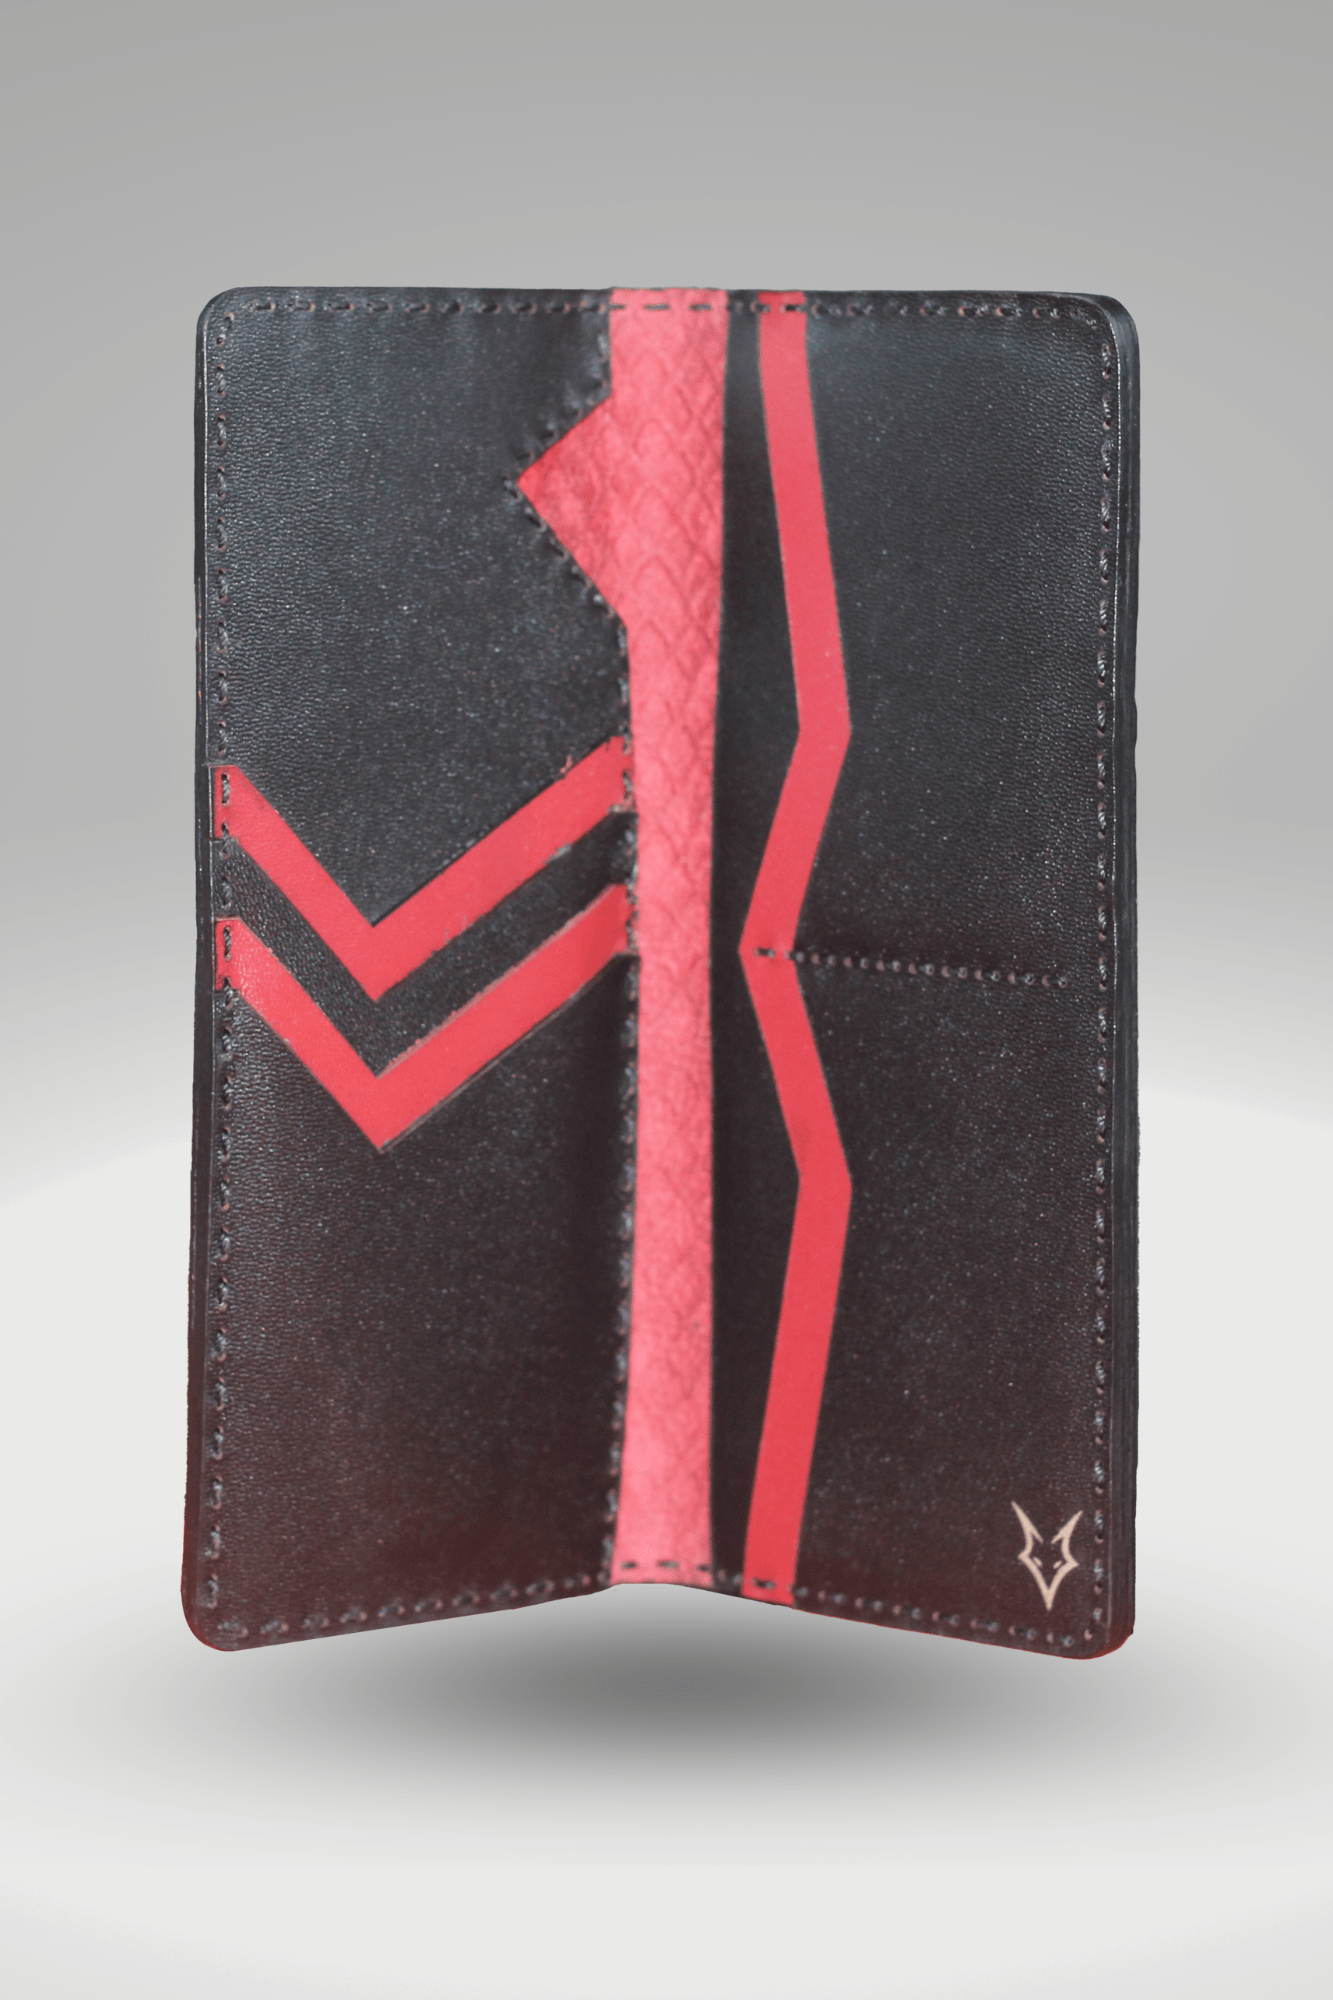 Unisex Genuine Leather Wallet With Black Hand-Tipped Maroon Python Textured Finish